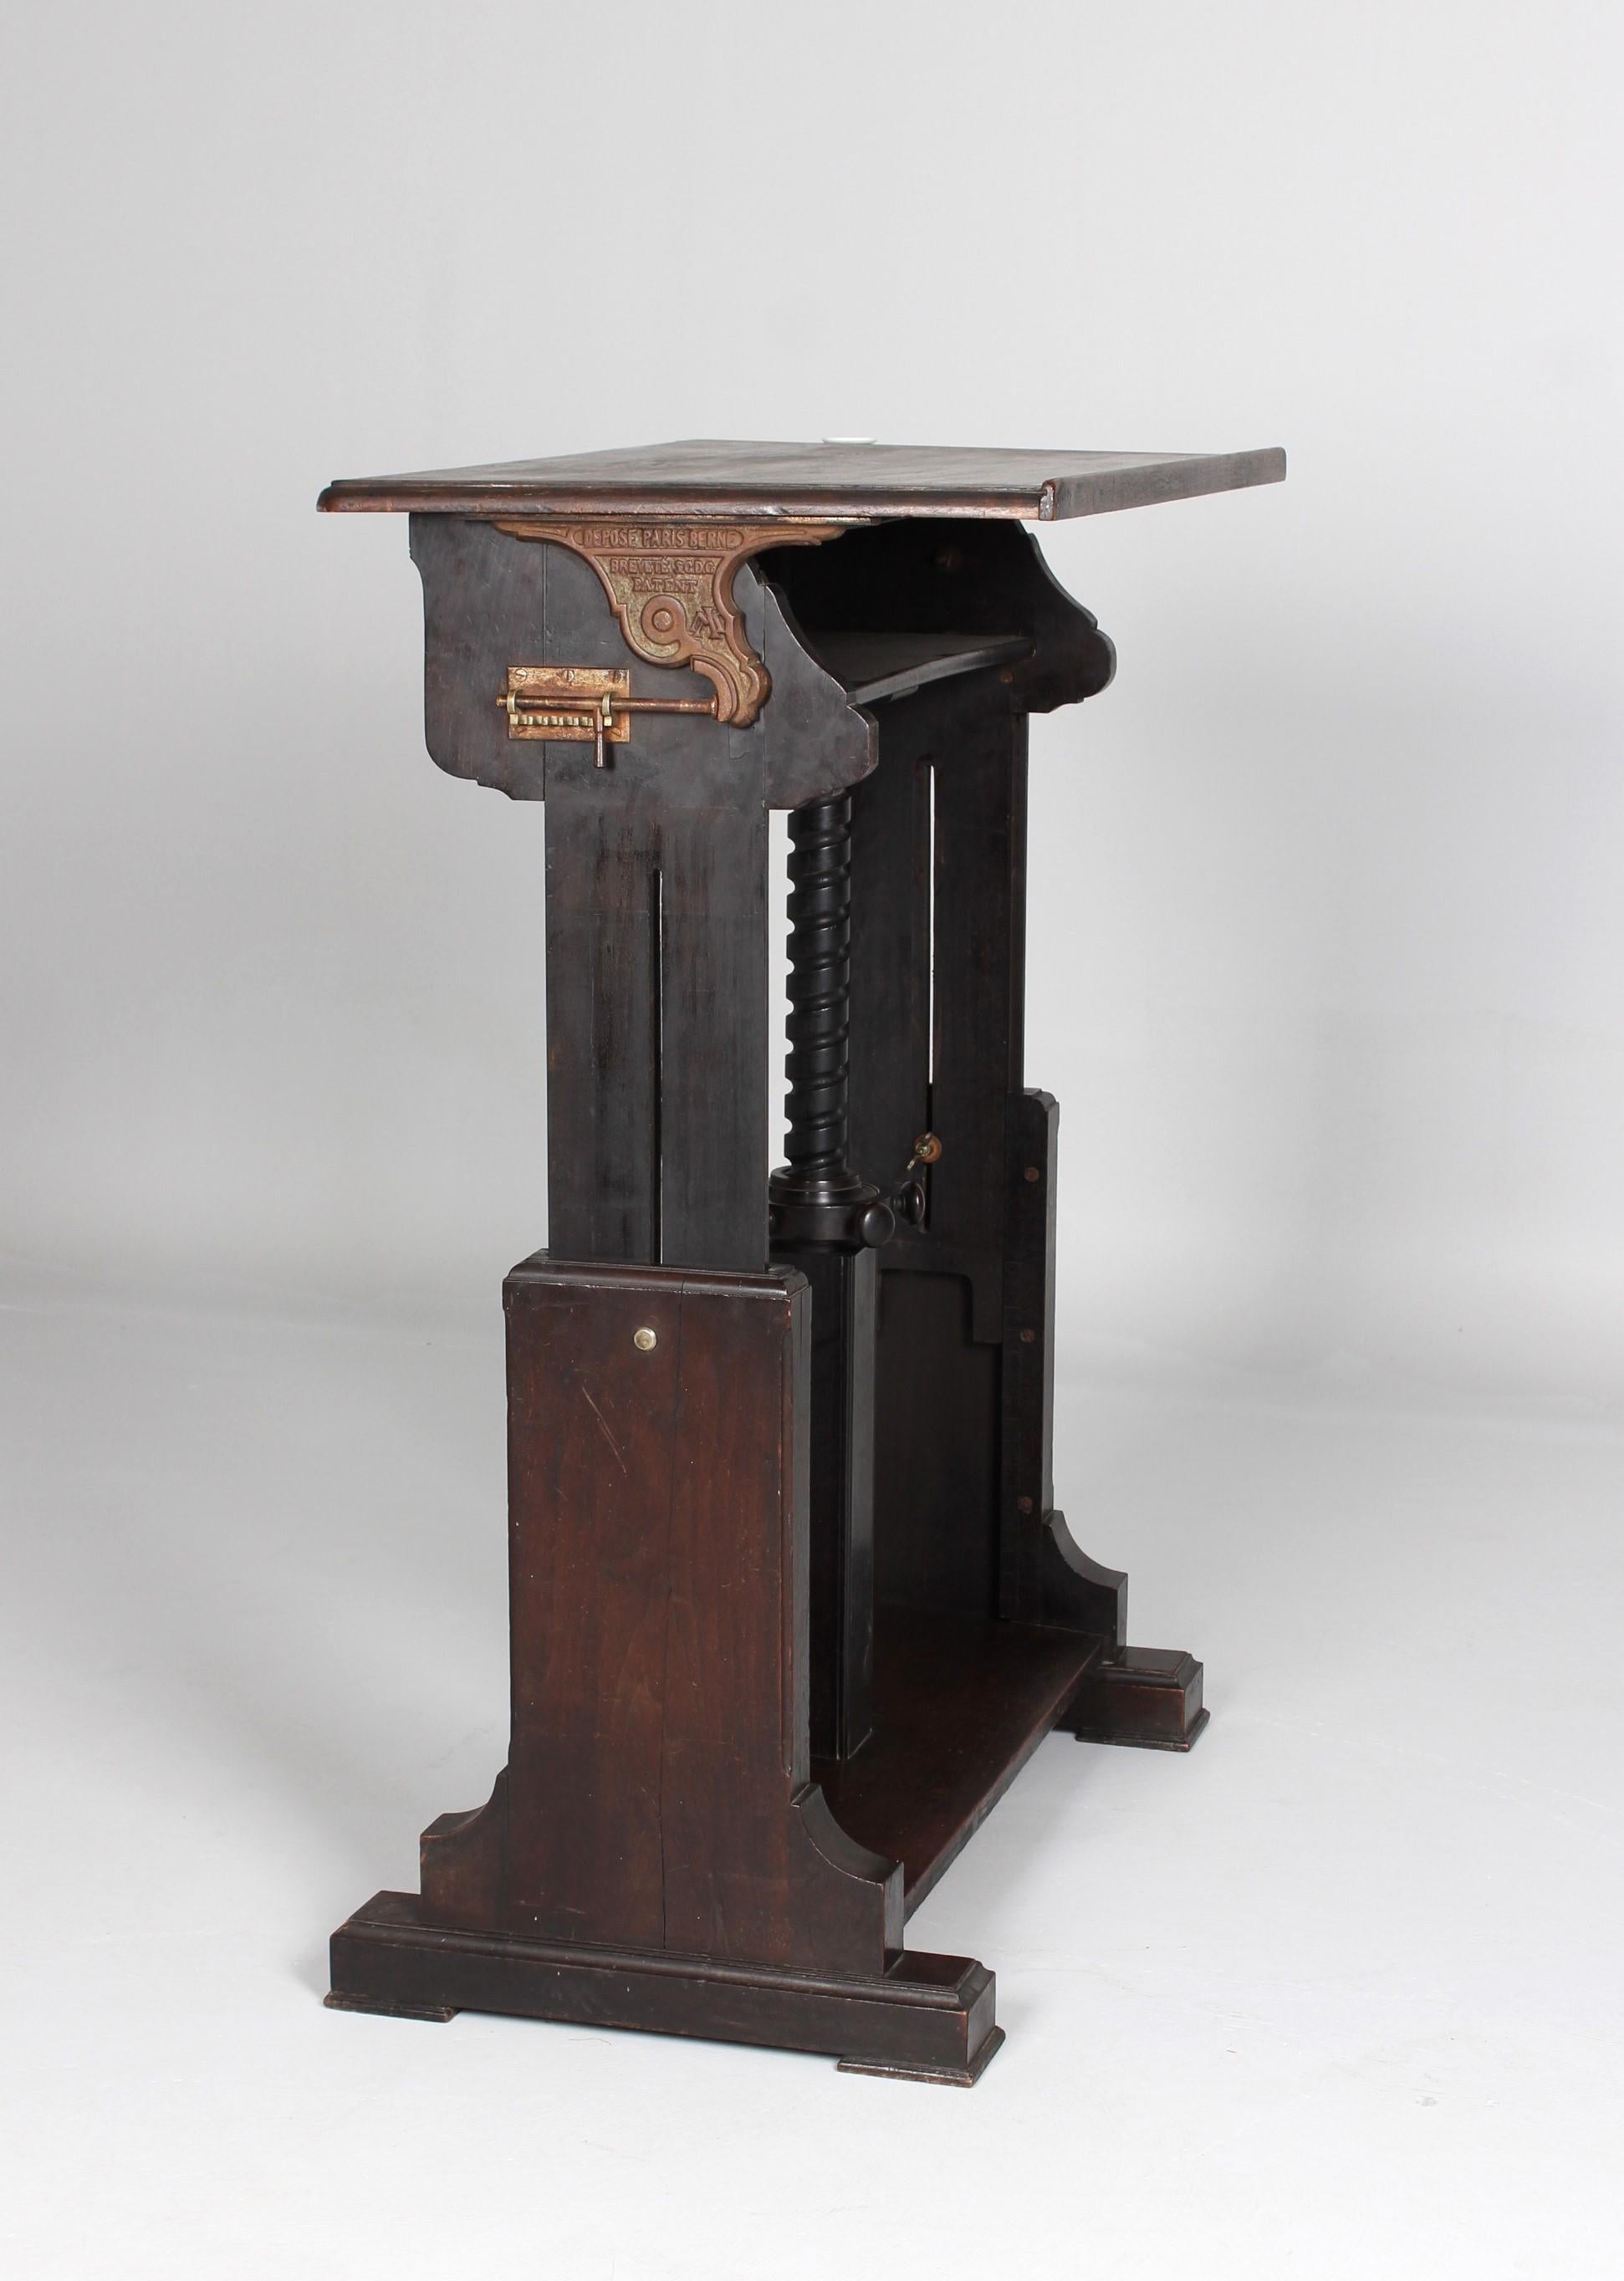 Swiss Early 20th Century Art Nouveau Lectern or Drawing Table, Switzerland, circa 1910